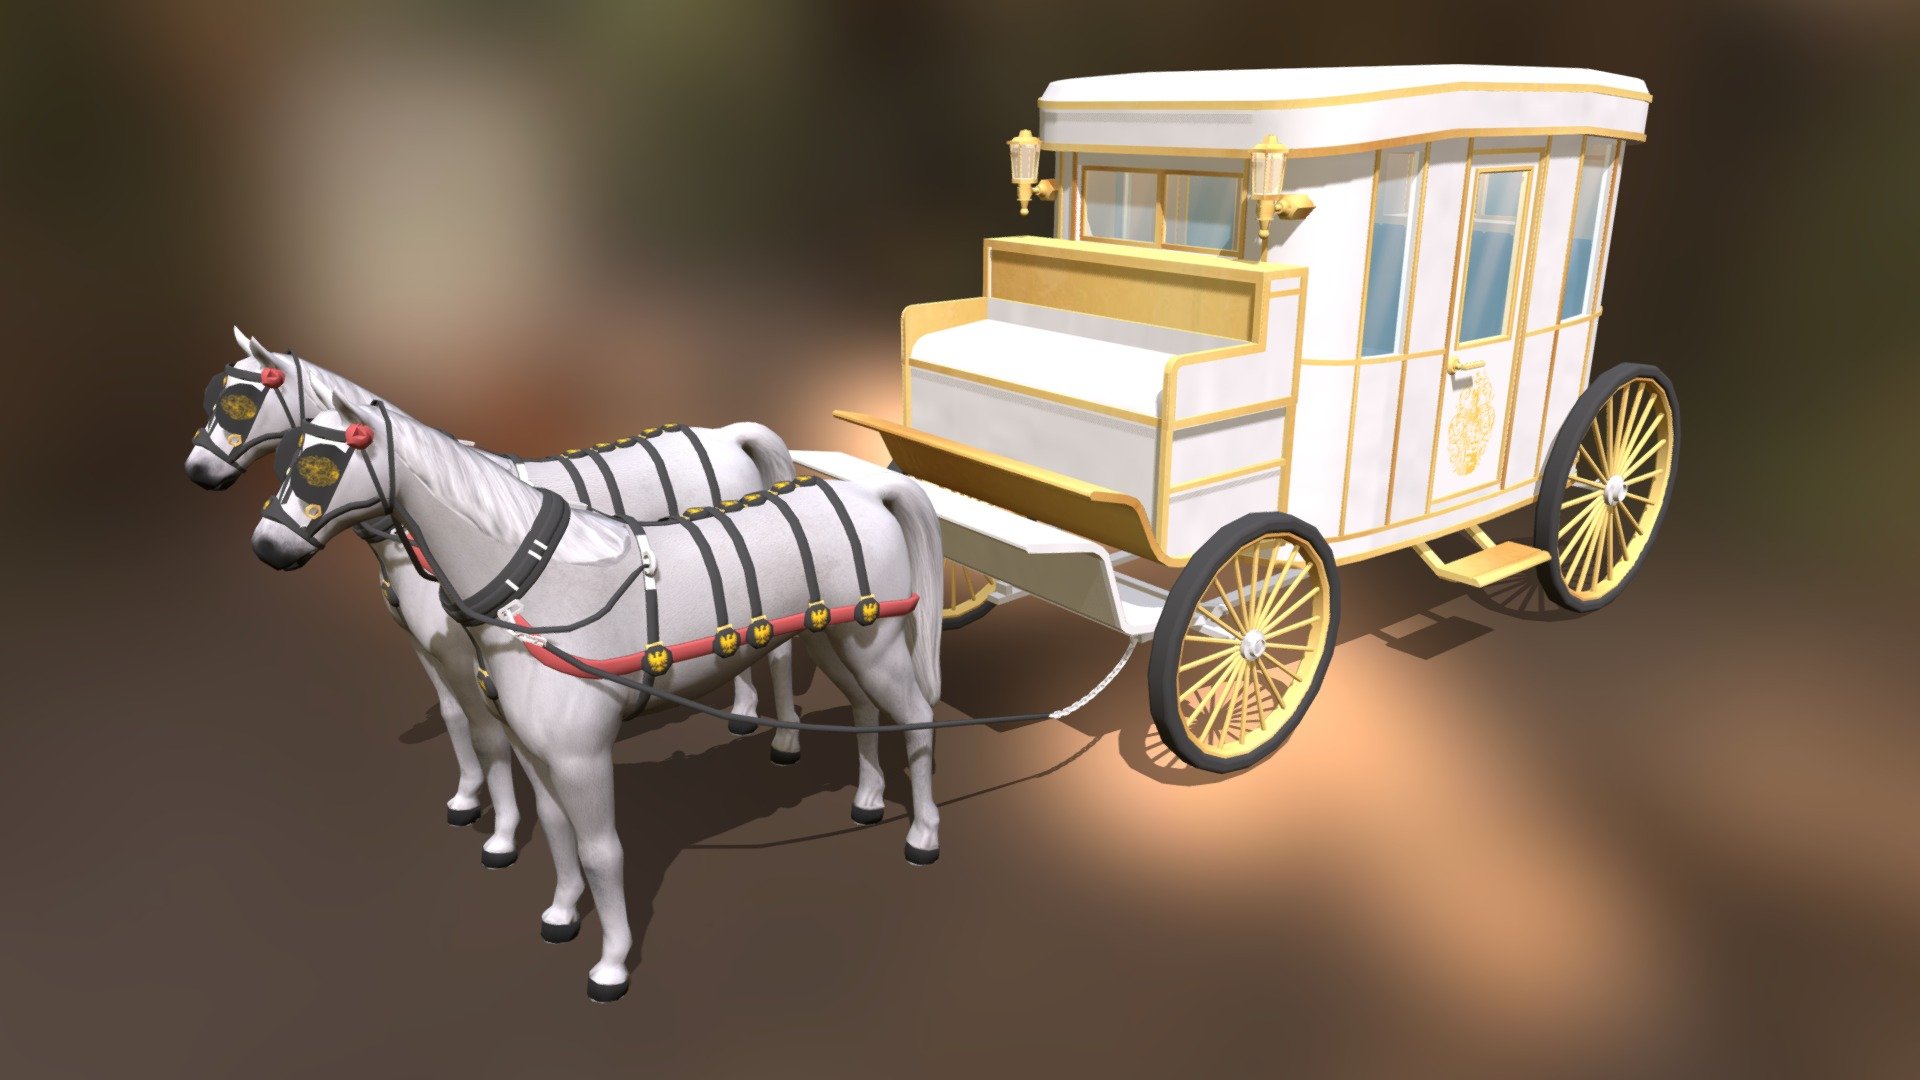 Hello.
We make objects and backgrounds for webtoons with sketchup.

But you can use it anywhere else.

-

This is &ldquo;**  Carriage #03  ** &ldquo;

I hope you use it well.

If you like it please click &lsquo;Like' :)

Its sketchup file contains dynamic elements.

*sketchup version is 13 - Carriage #03 - Buy Royalty Free 3D model by digikstudio 3d model